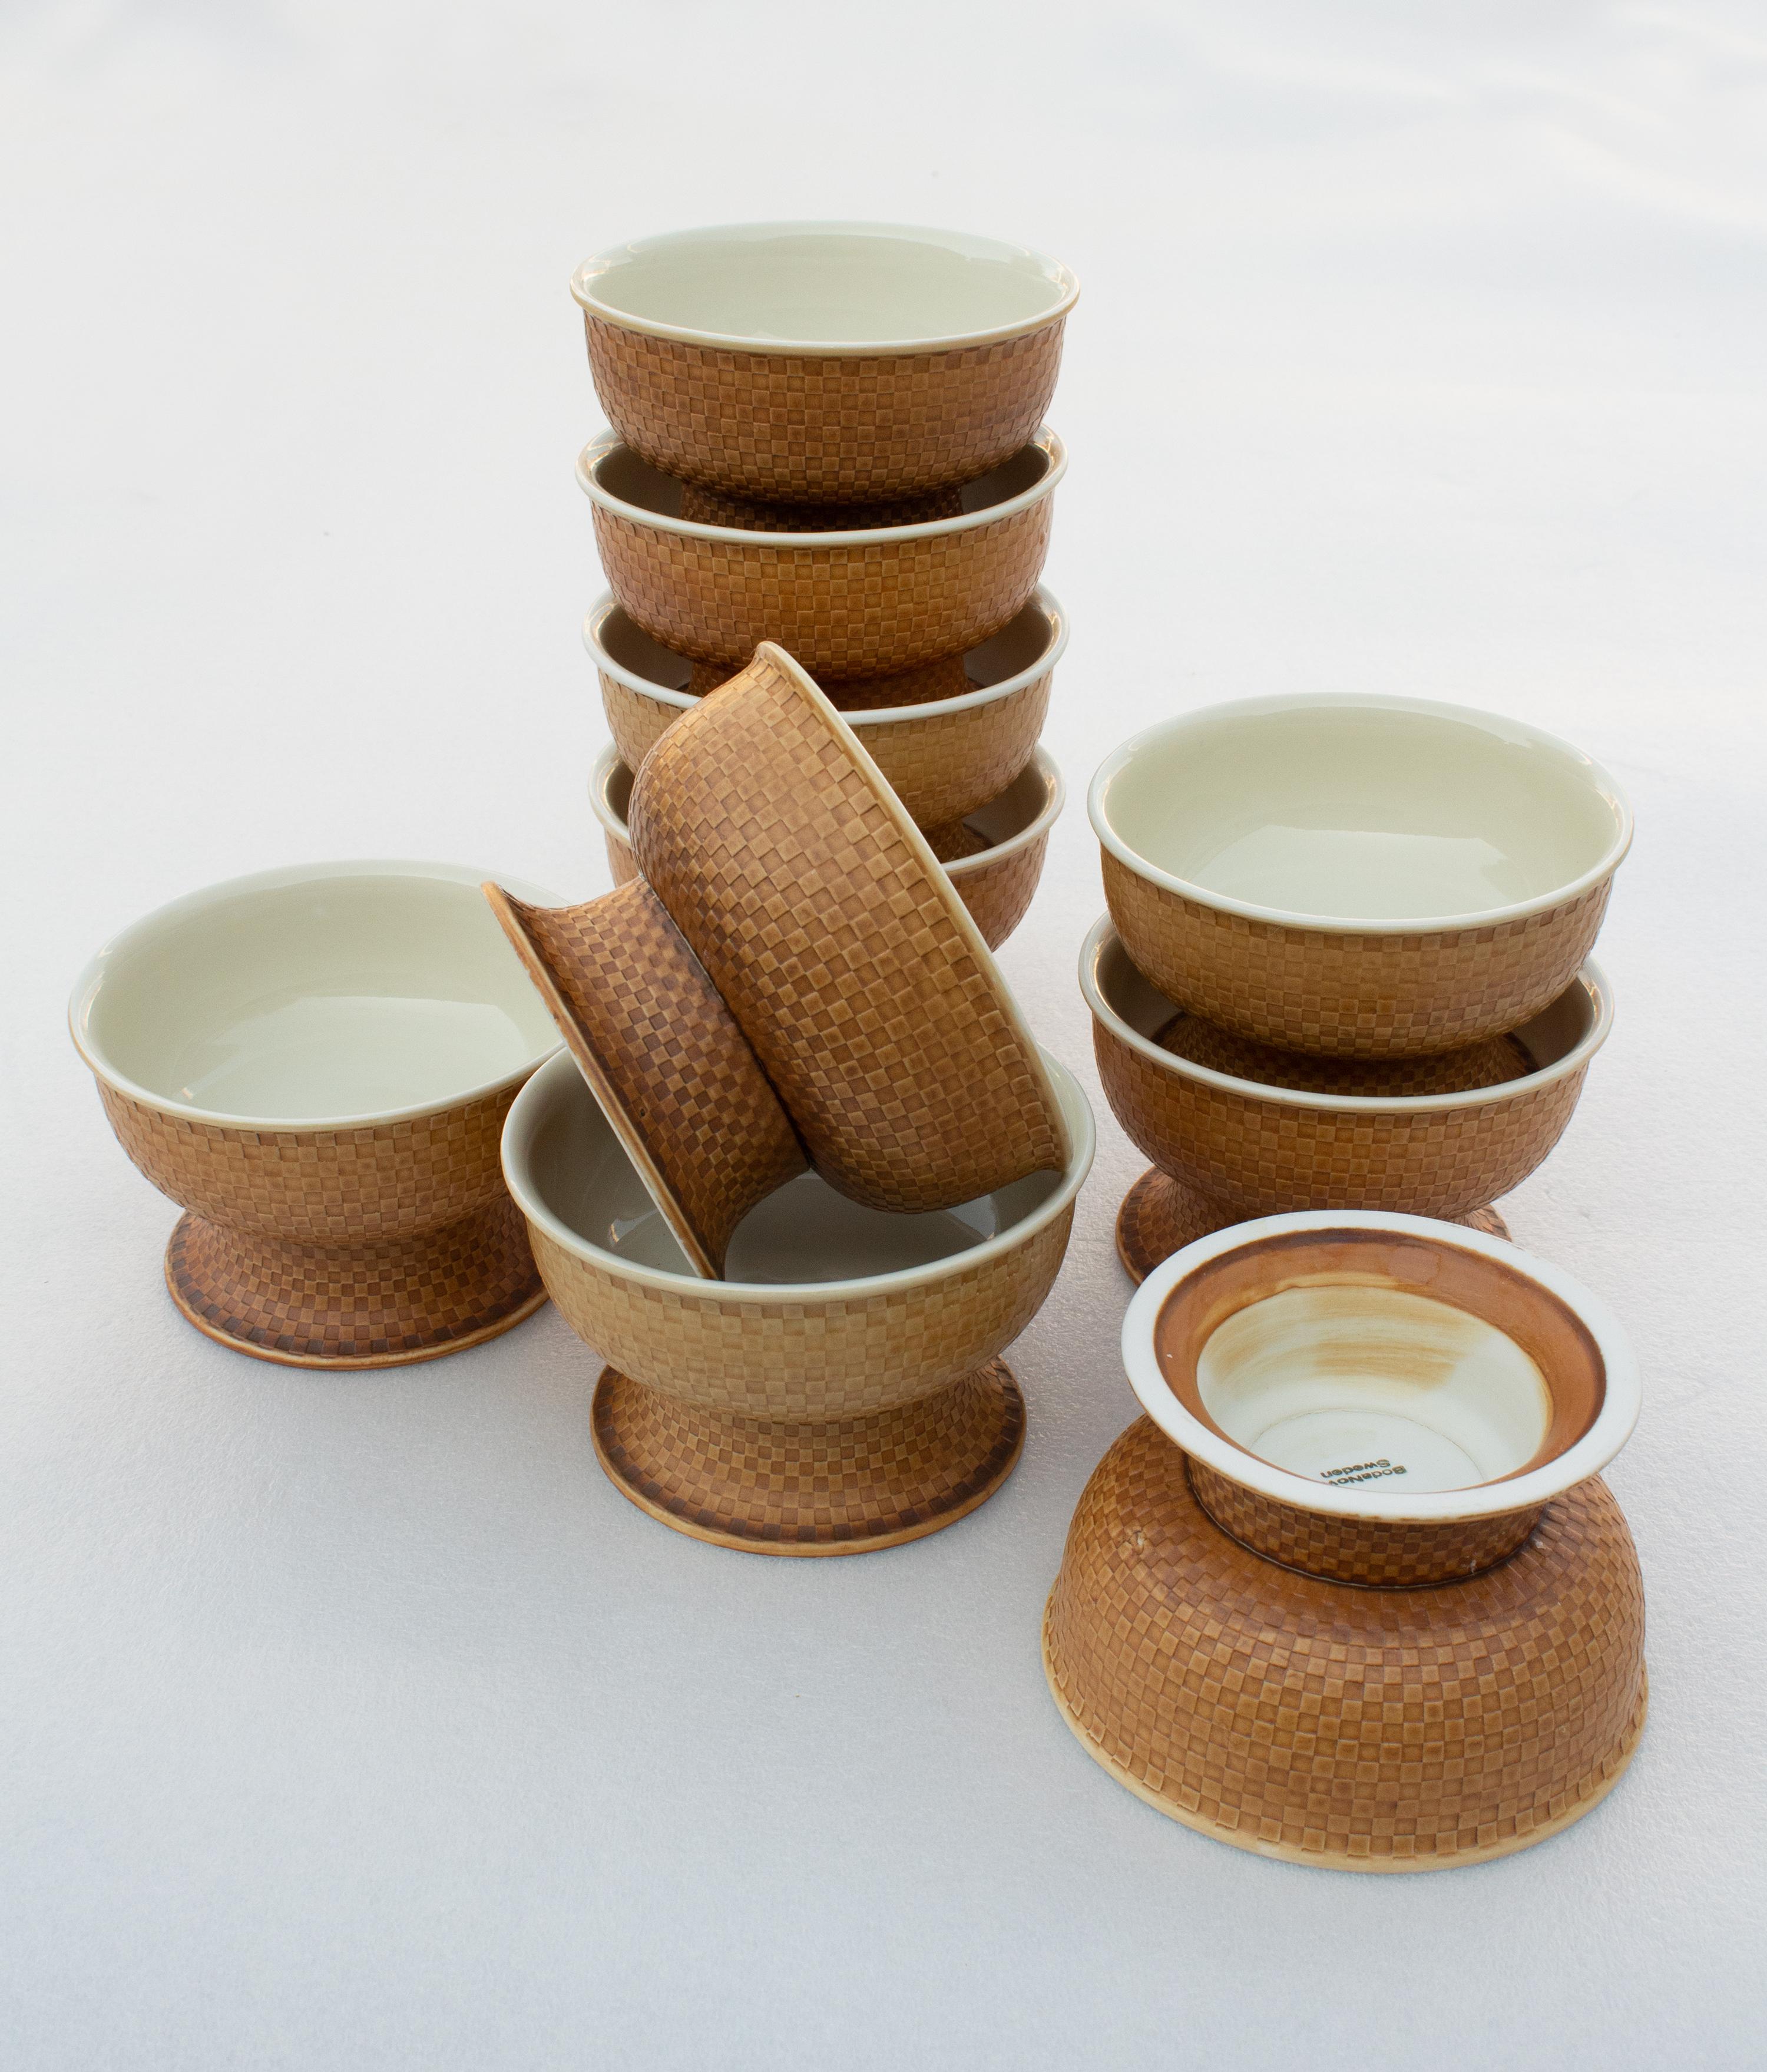 12 Bowls with Terracotta Glaze by Signe Persson Melin for Boda Nova, Sweden In Excellent Condition For Sale In Stockholm, SE